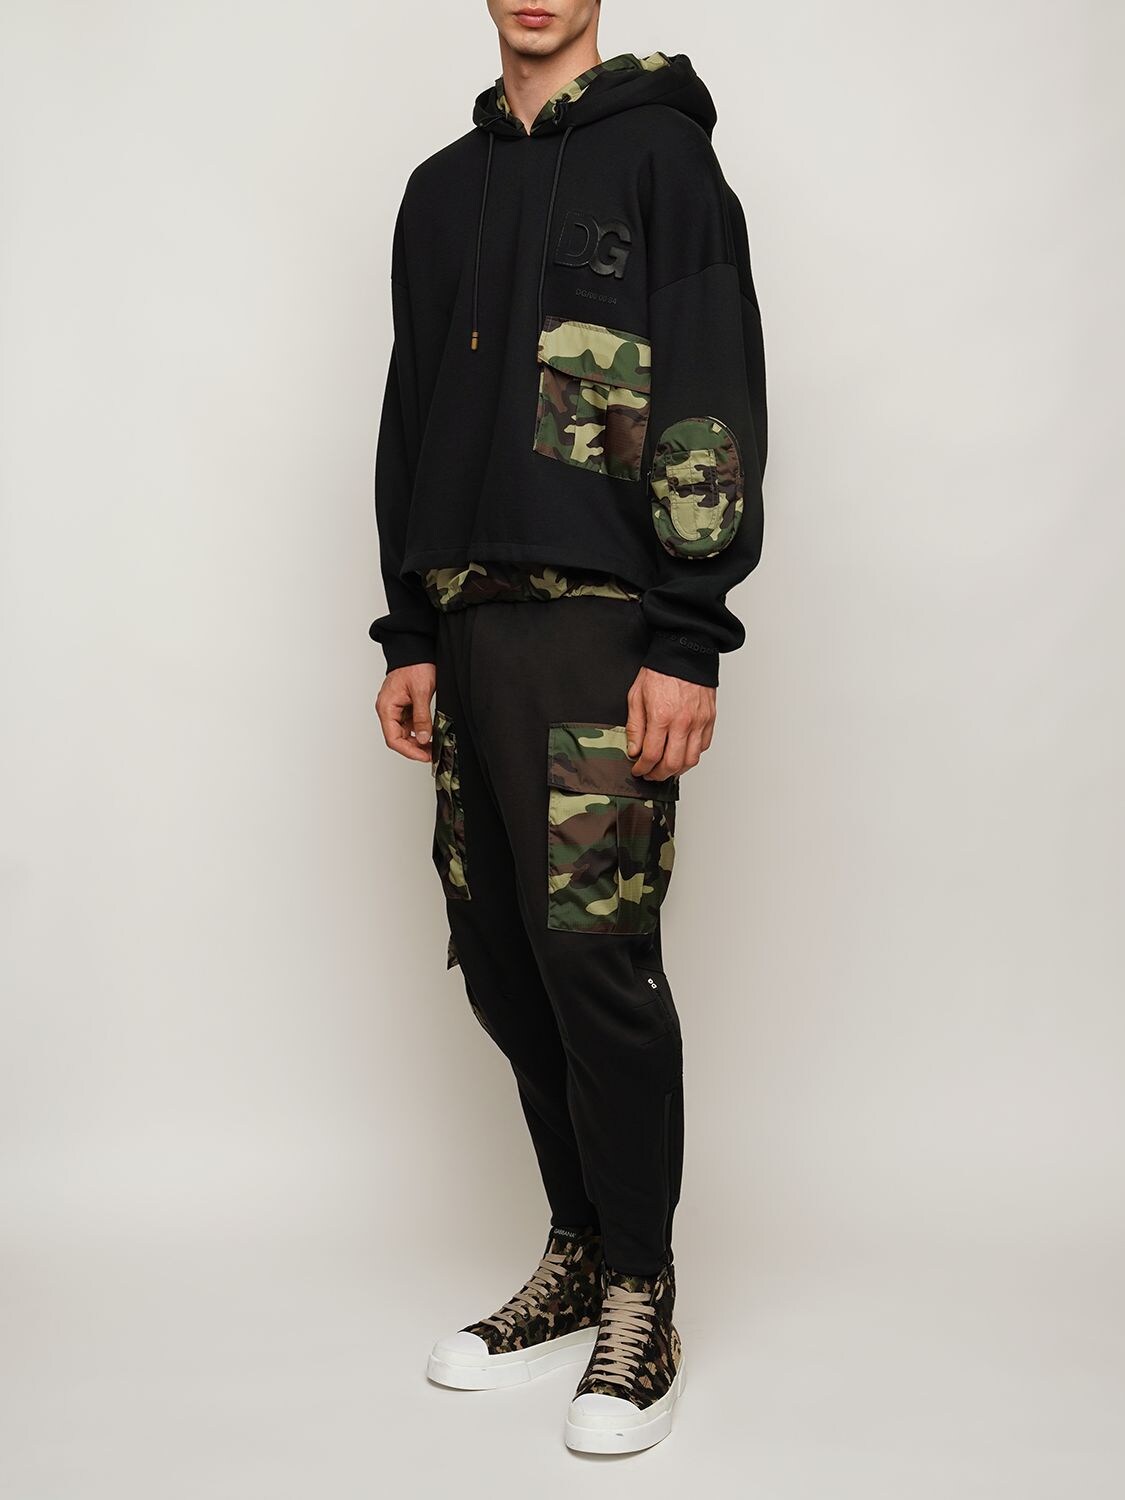 Dolce & Gabbana Hooded Sweatshirt With Camouflage Details In 